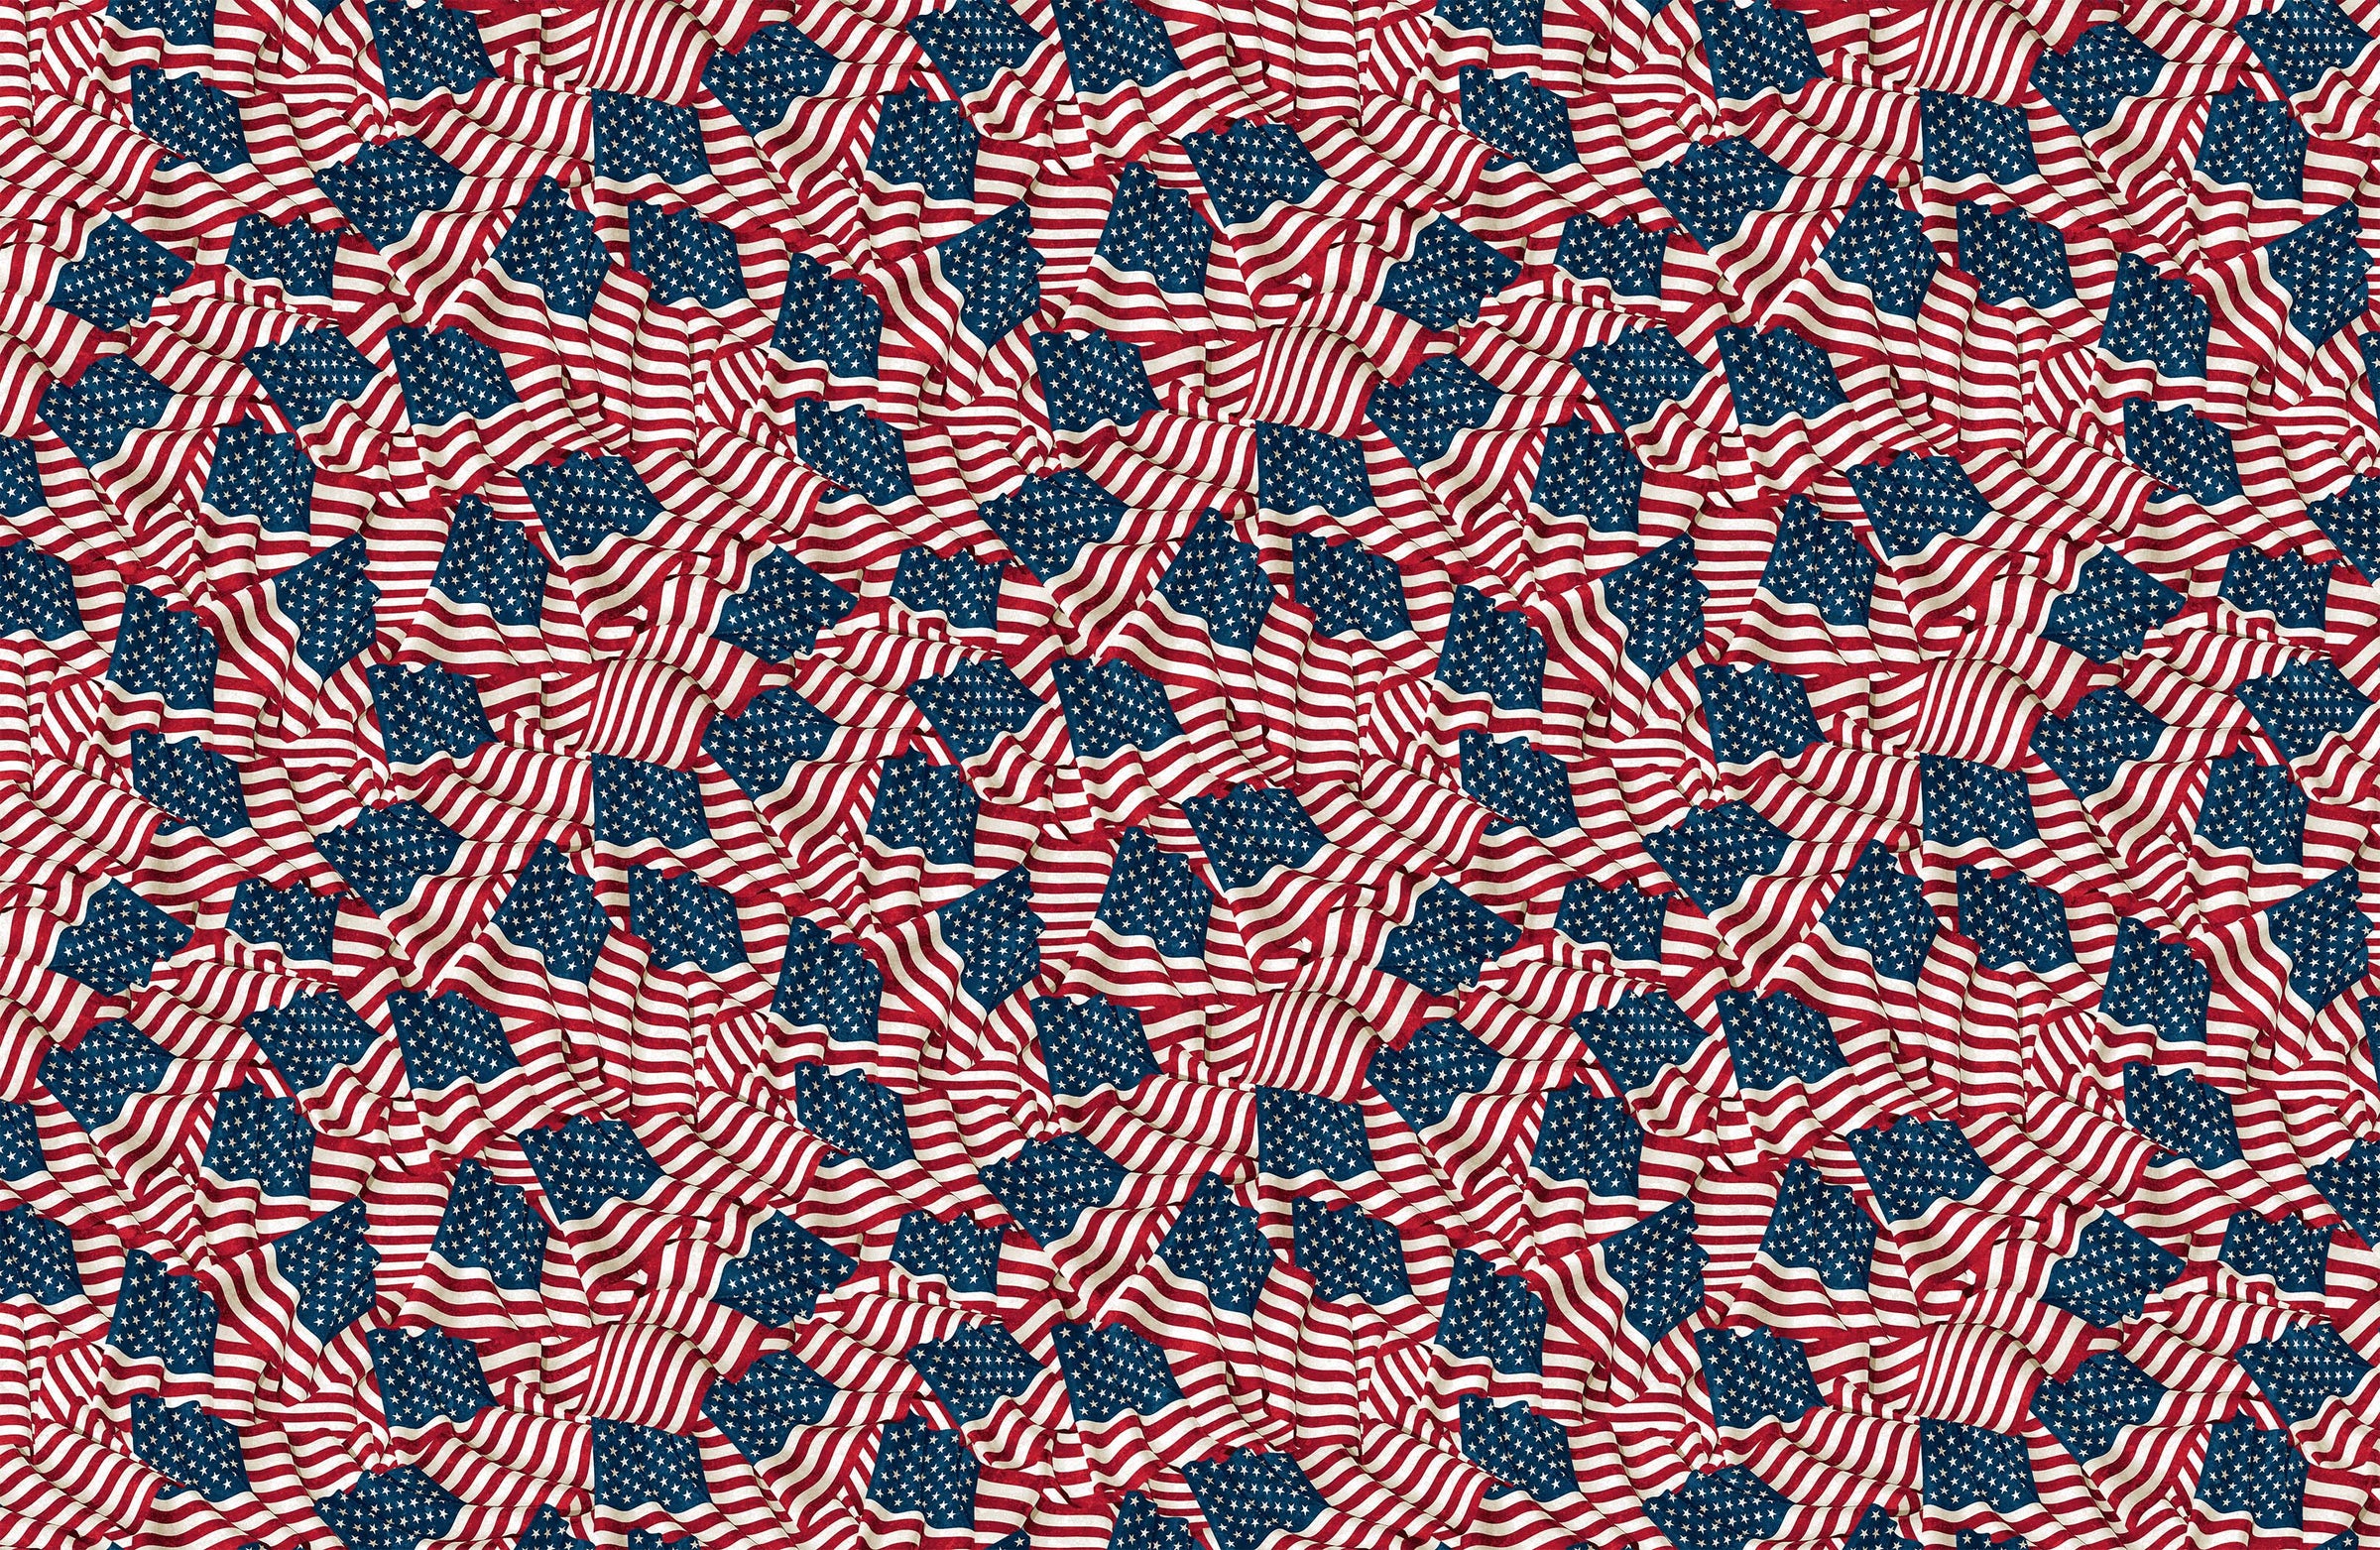 Stonehenge Stars and Stripes Quilt Fabric - Waving Flags in Navy/Multi - 24284-49